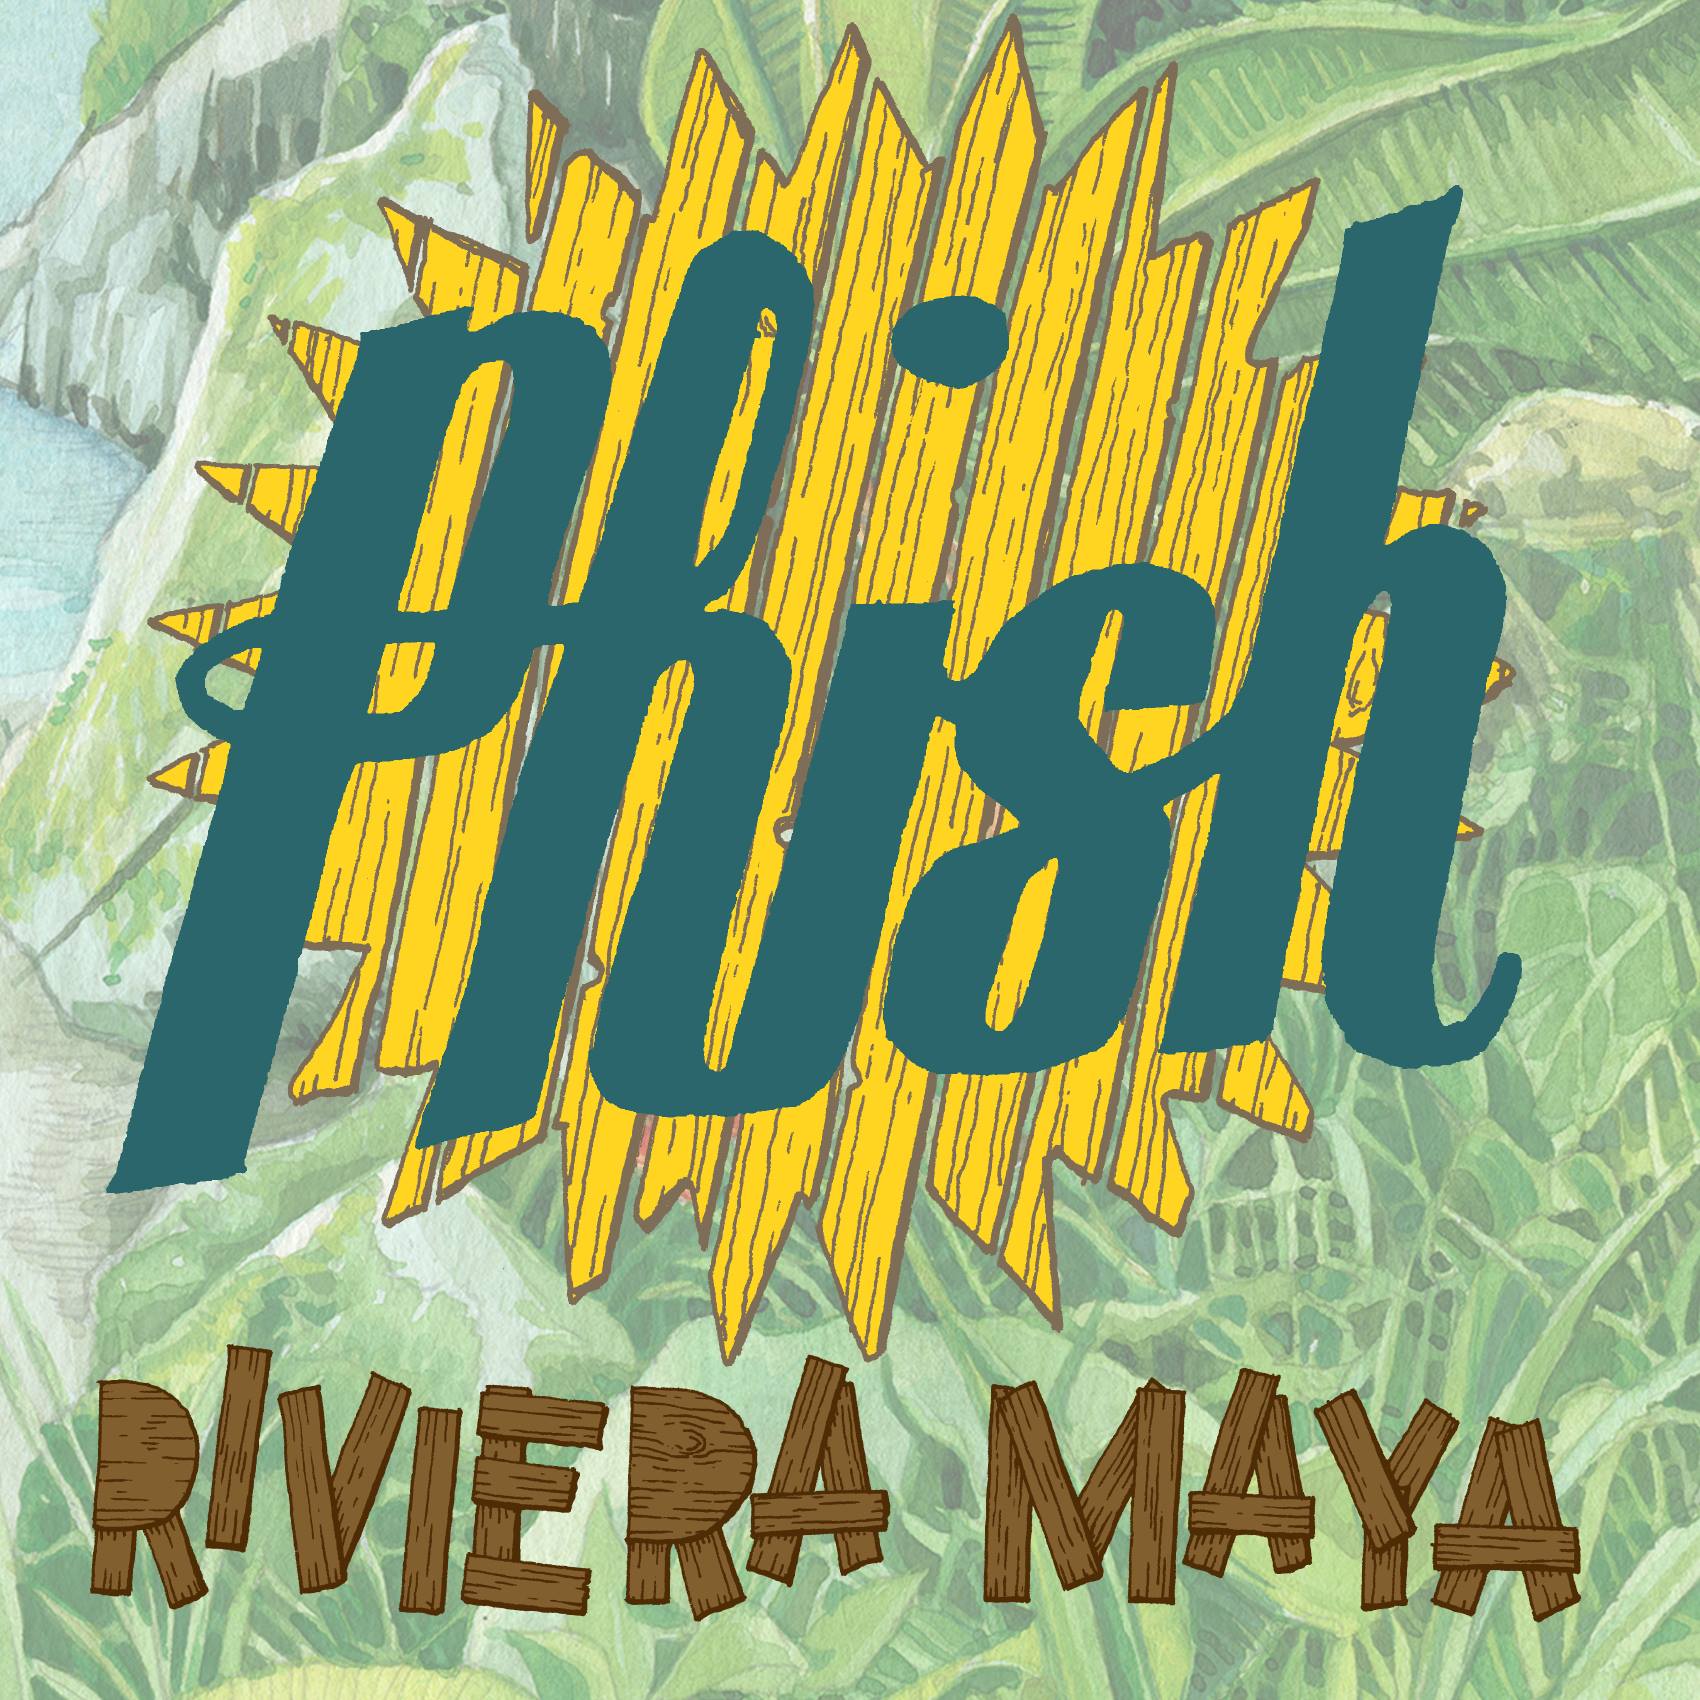 Phish In Mexico An All Inclusive Experience banjos to beats